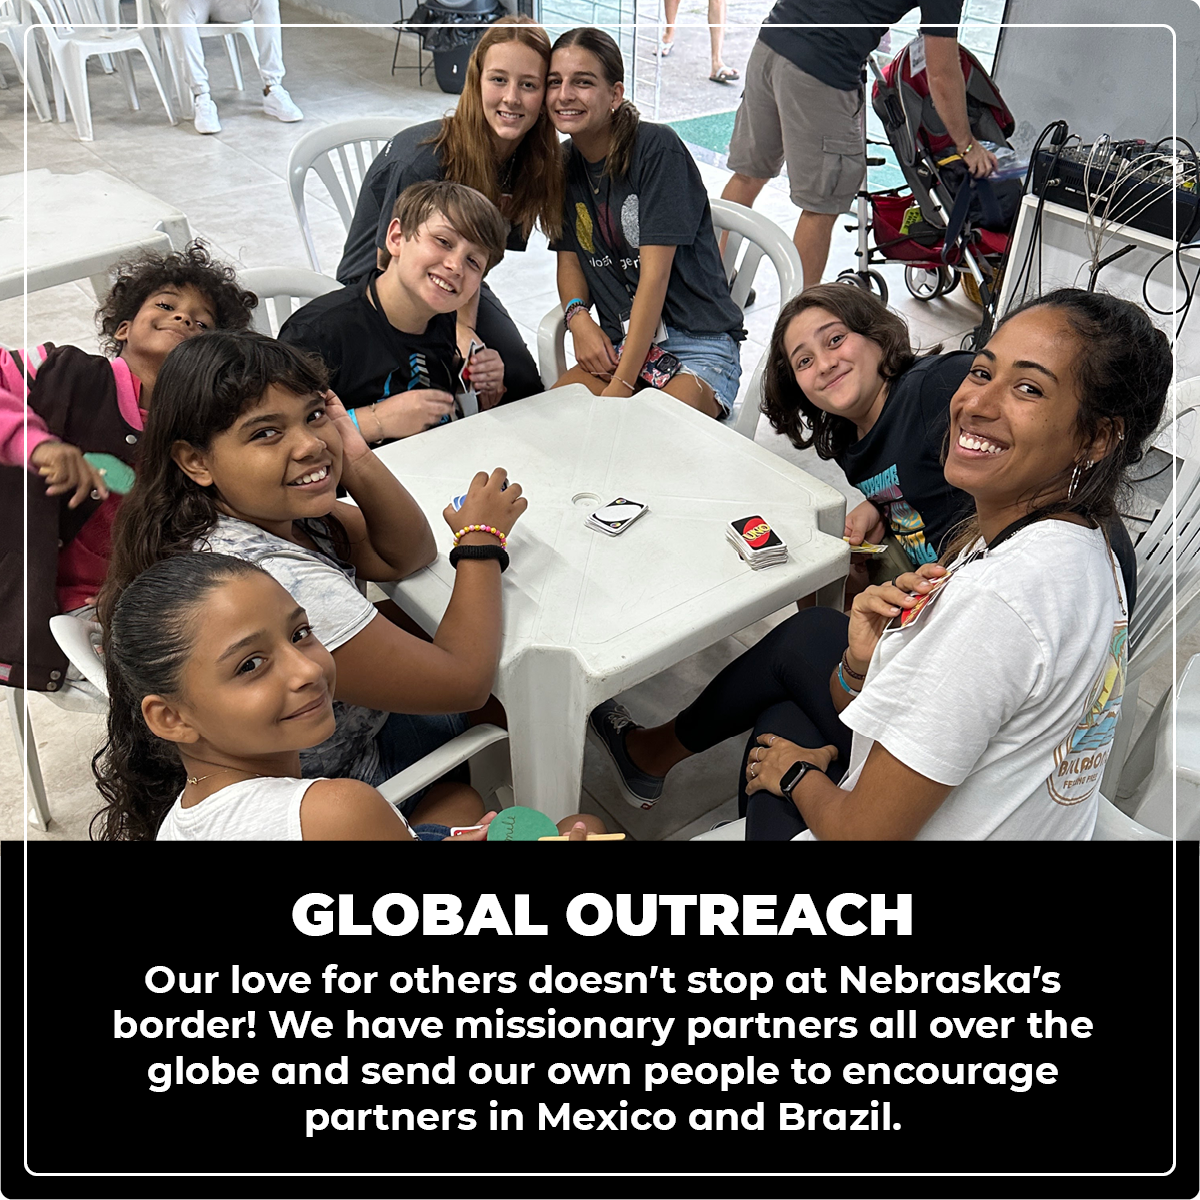 Global Outreach: Our love for others doesn’t stop at Nebraska’s border! We have missionary partners all over the globe and send our own people to encourage partners in Mexico and Brazil.